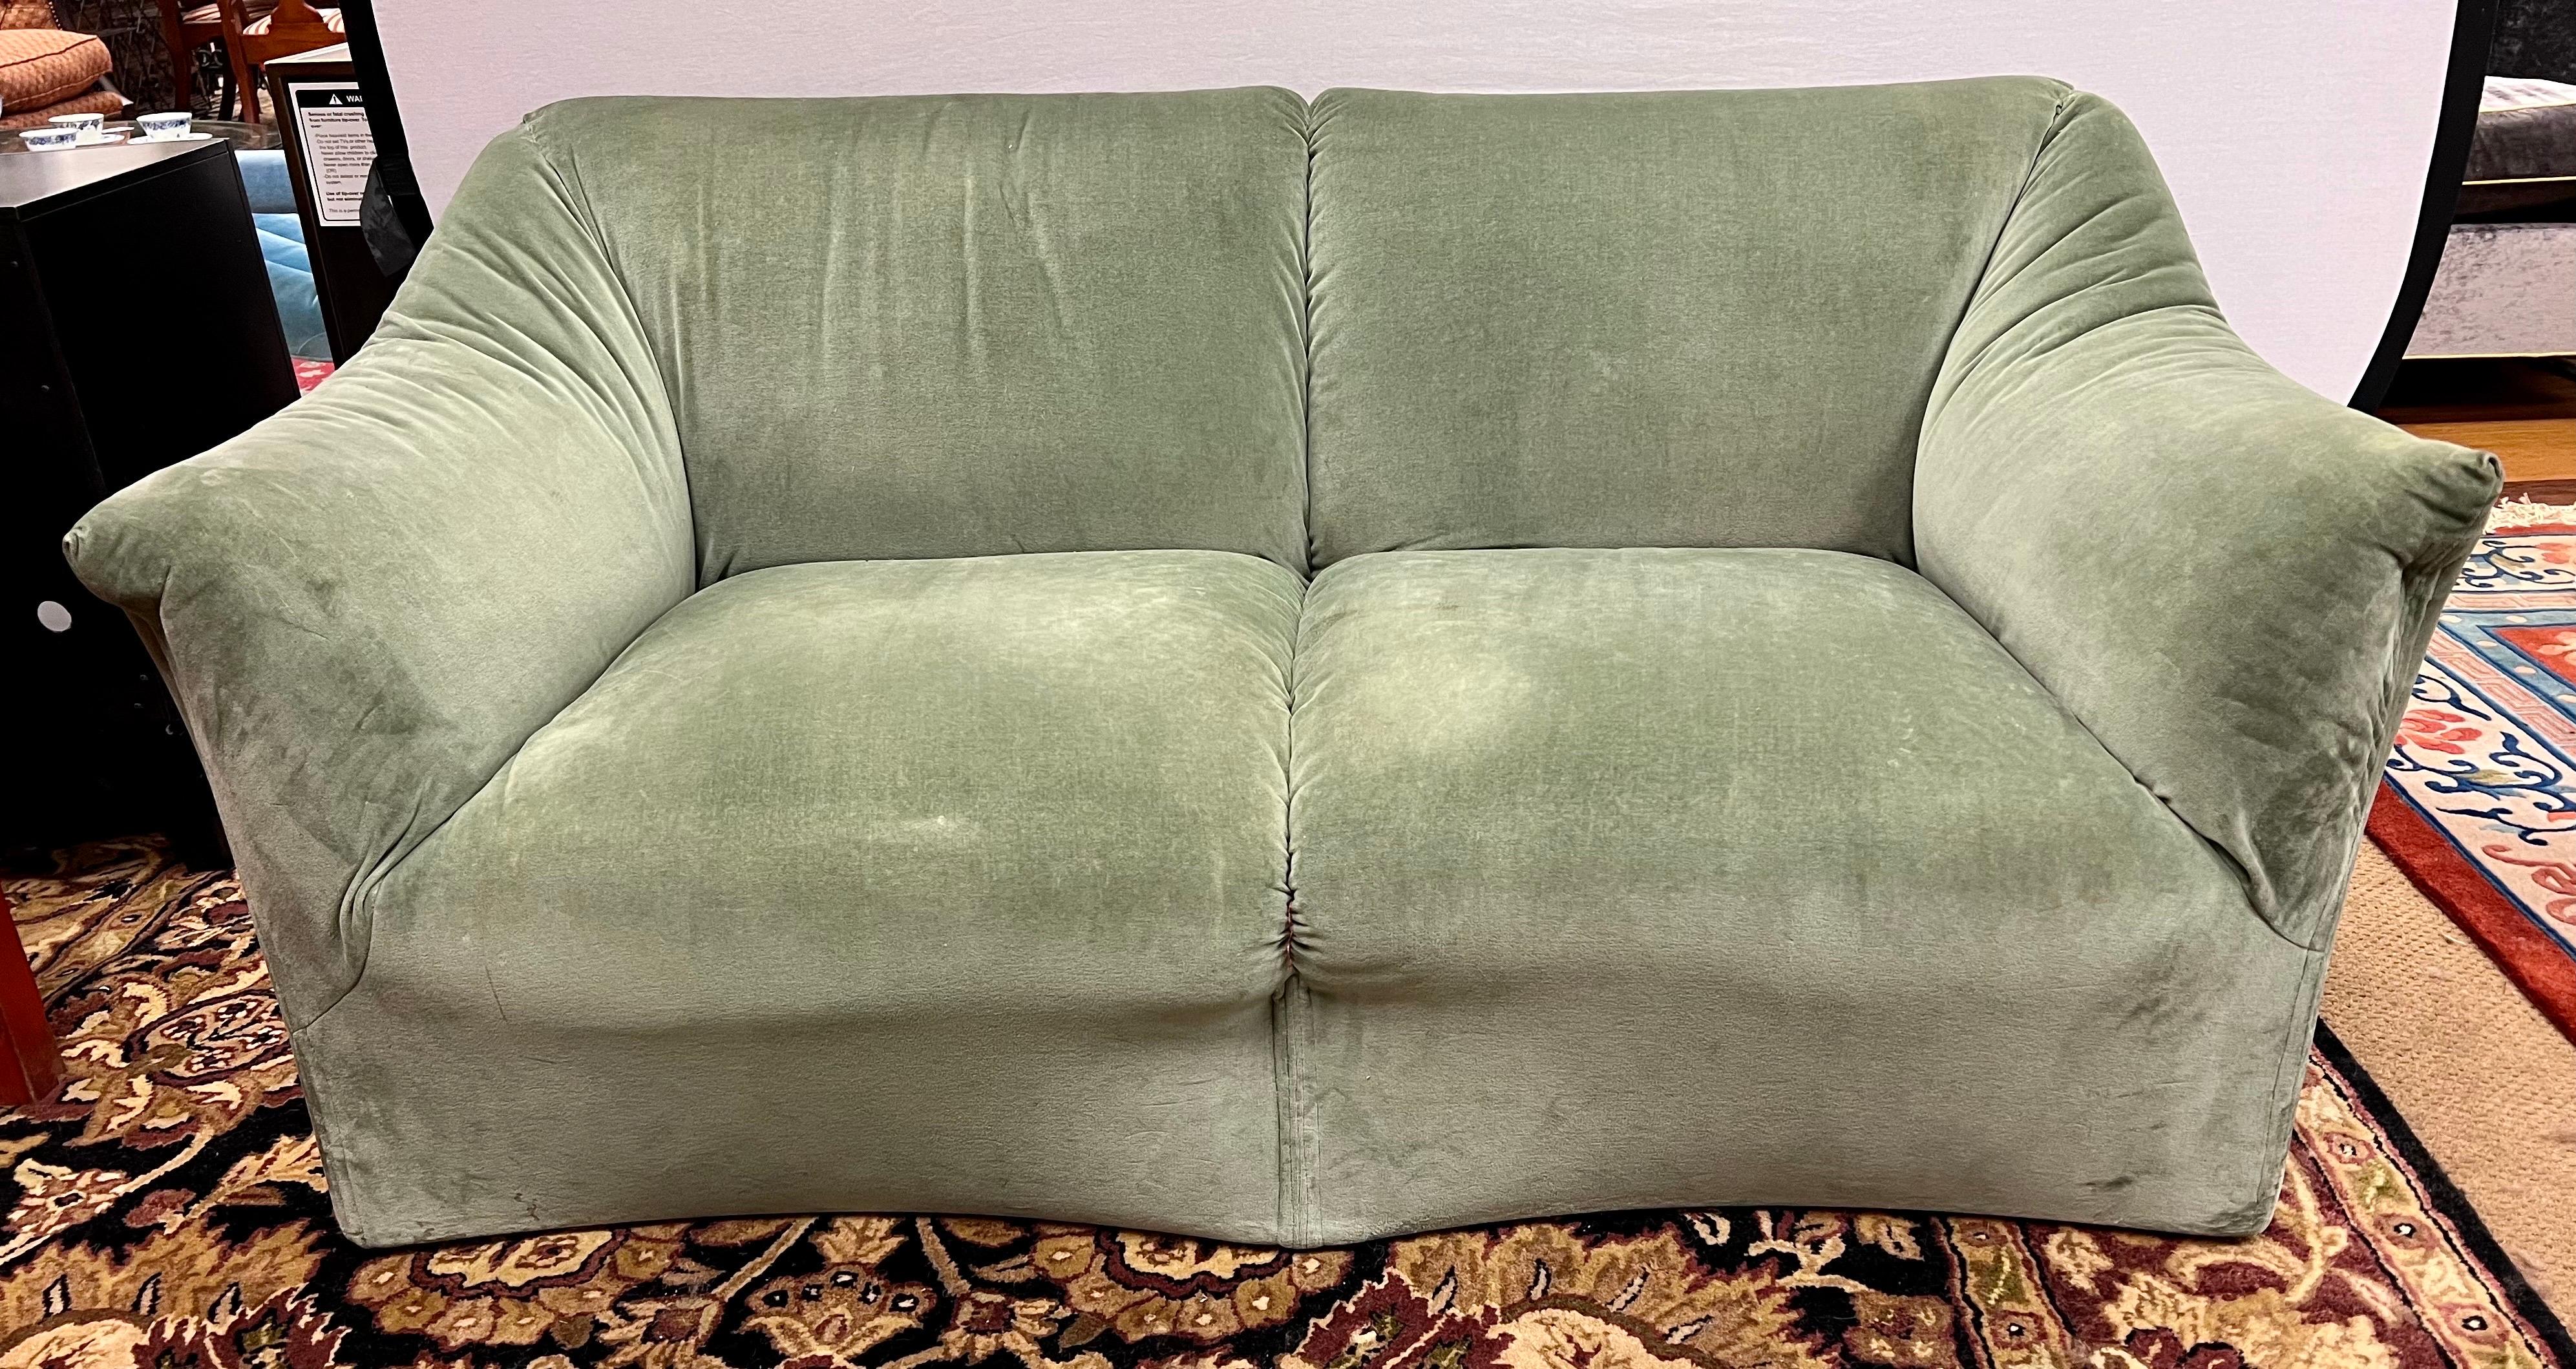 Vintage Tentazione loveseat's sculptural curves offer refined elegance and luxurious comfort. Designed by Mario Bellini and manufactured by Cassina, Italy, circa 1970s. This loveseat sofa looks similar to the earlier designed Bambole sofa by Bellini